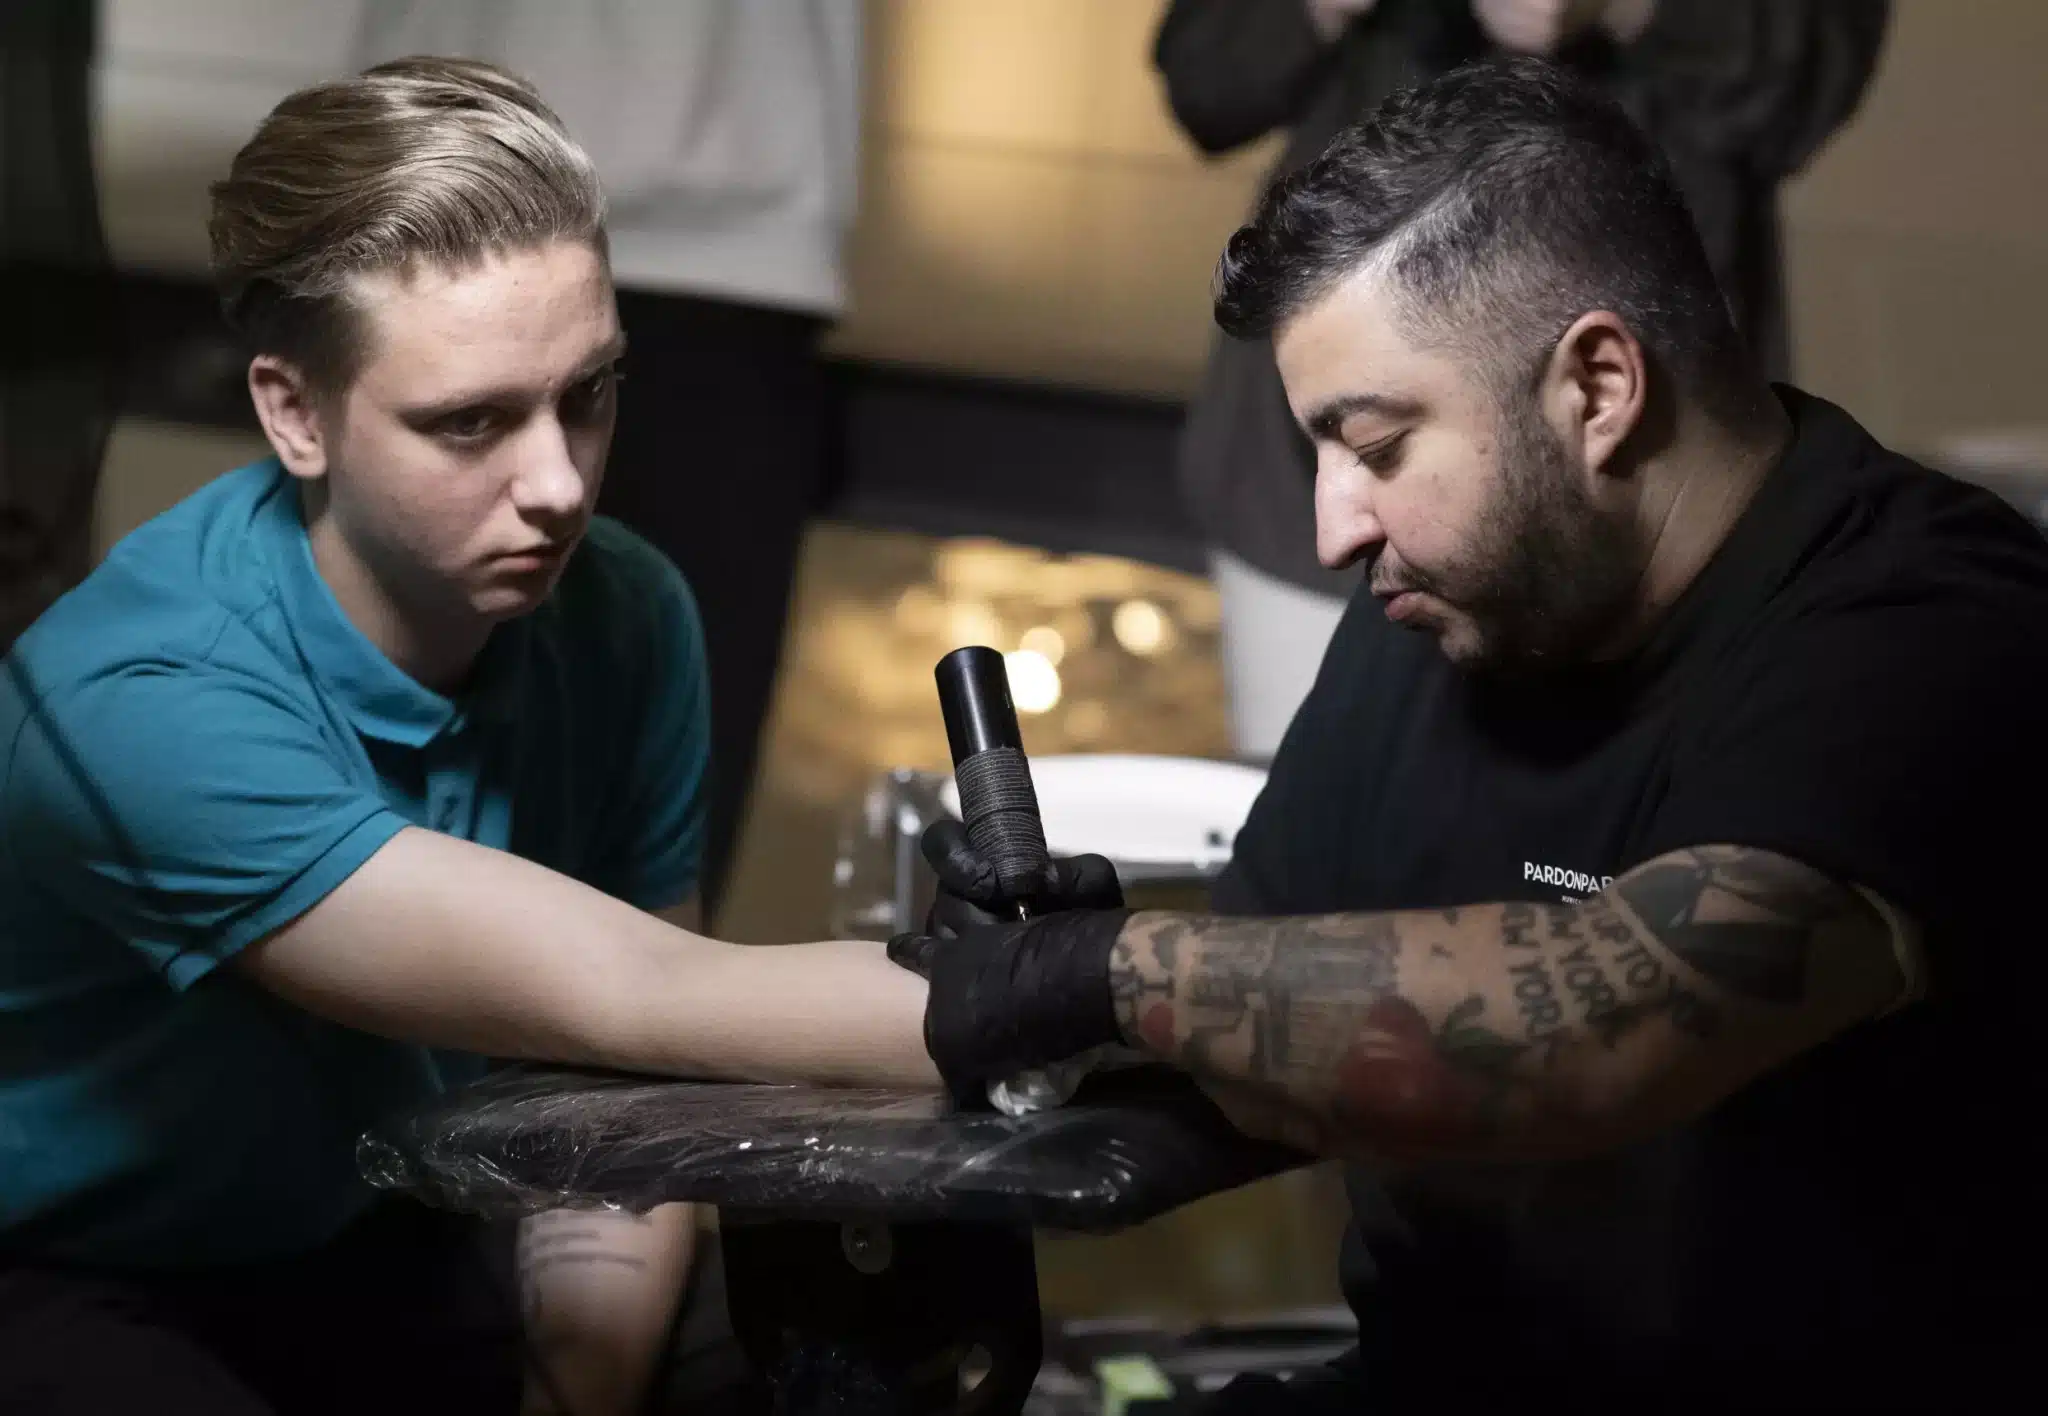 Catholics line up for free tattoos in Austria scaled